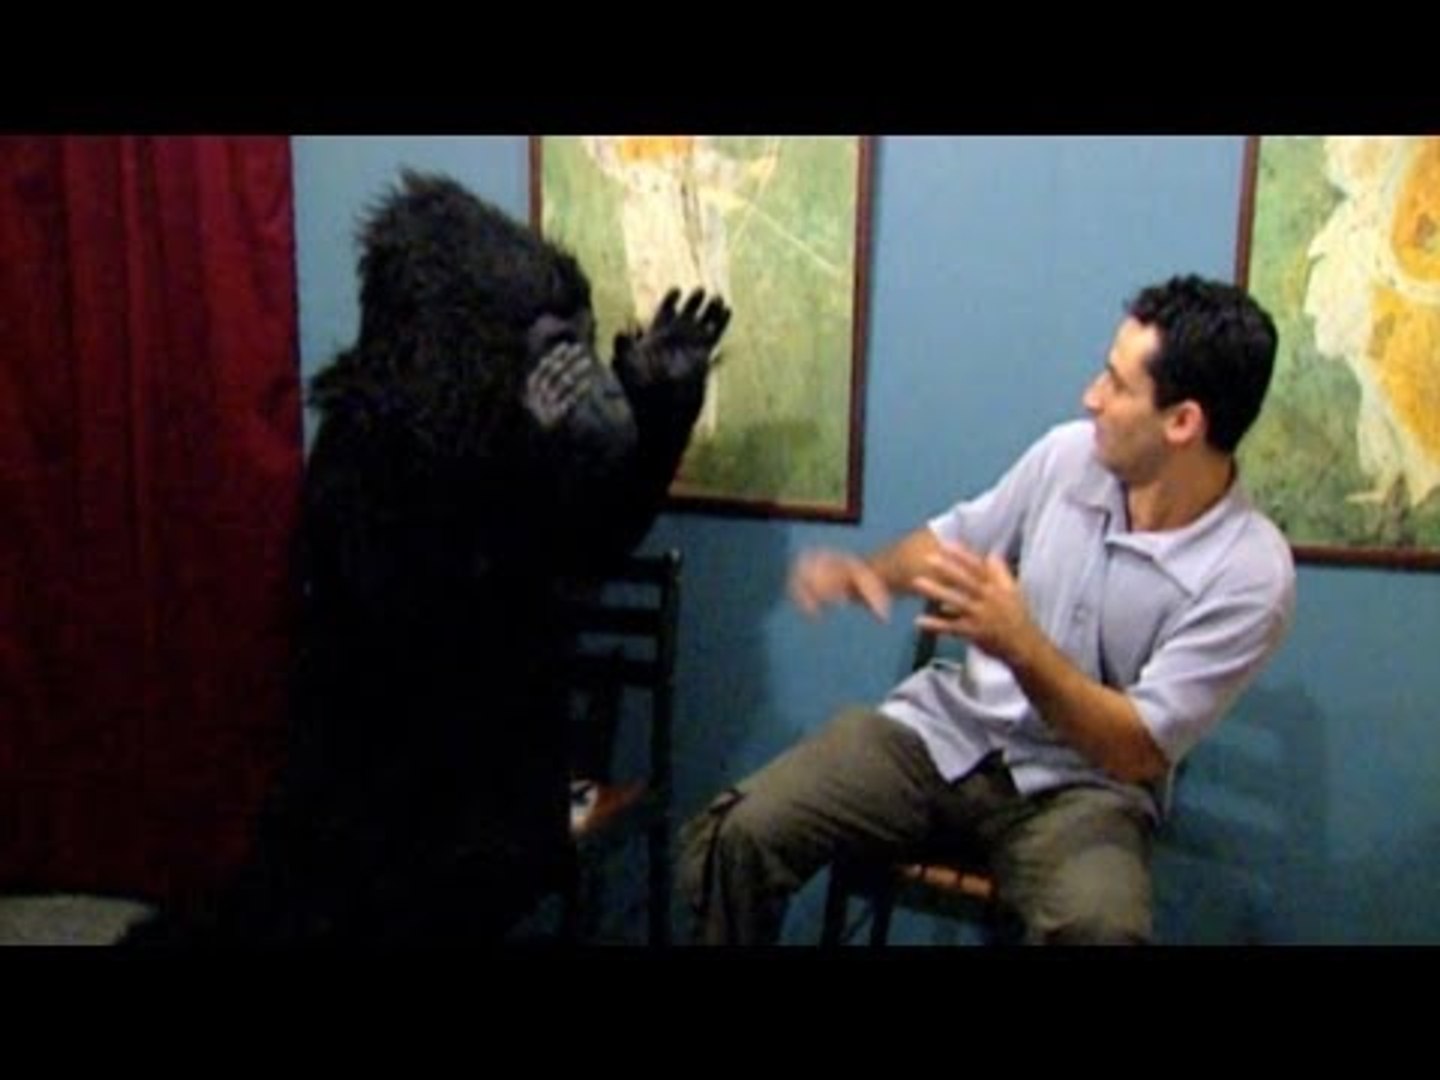 Waiting Room Pranks - Best of Just For Laughs Gags